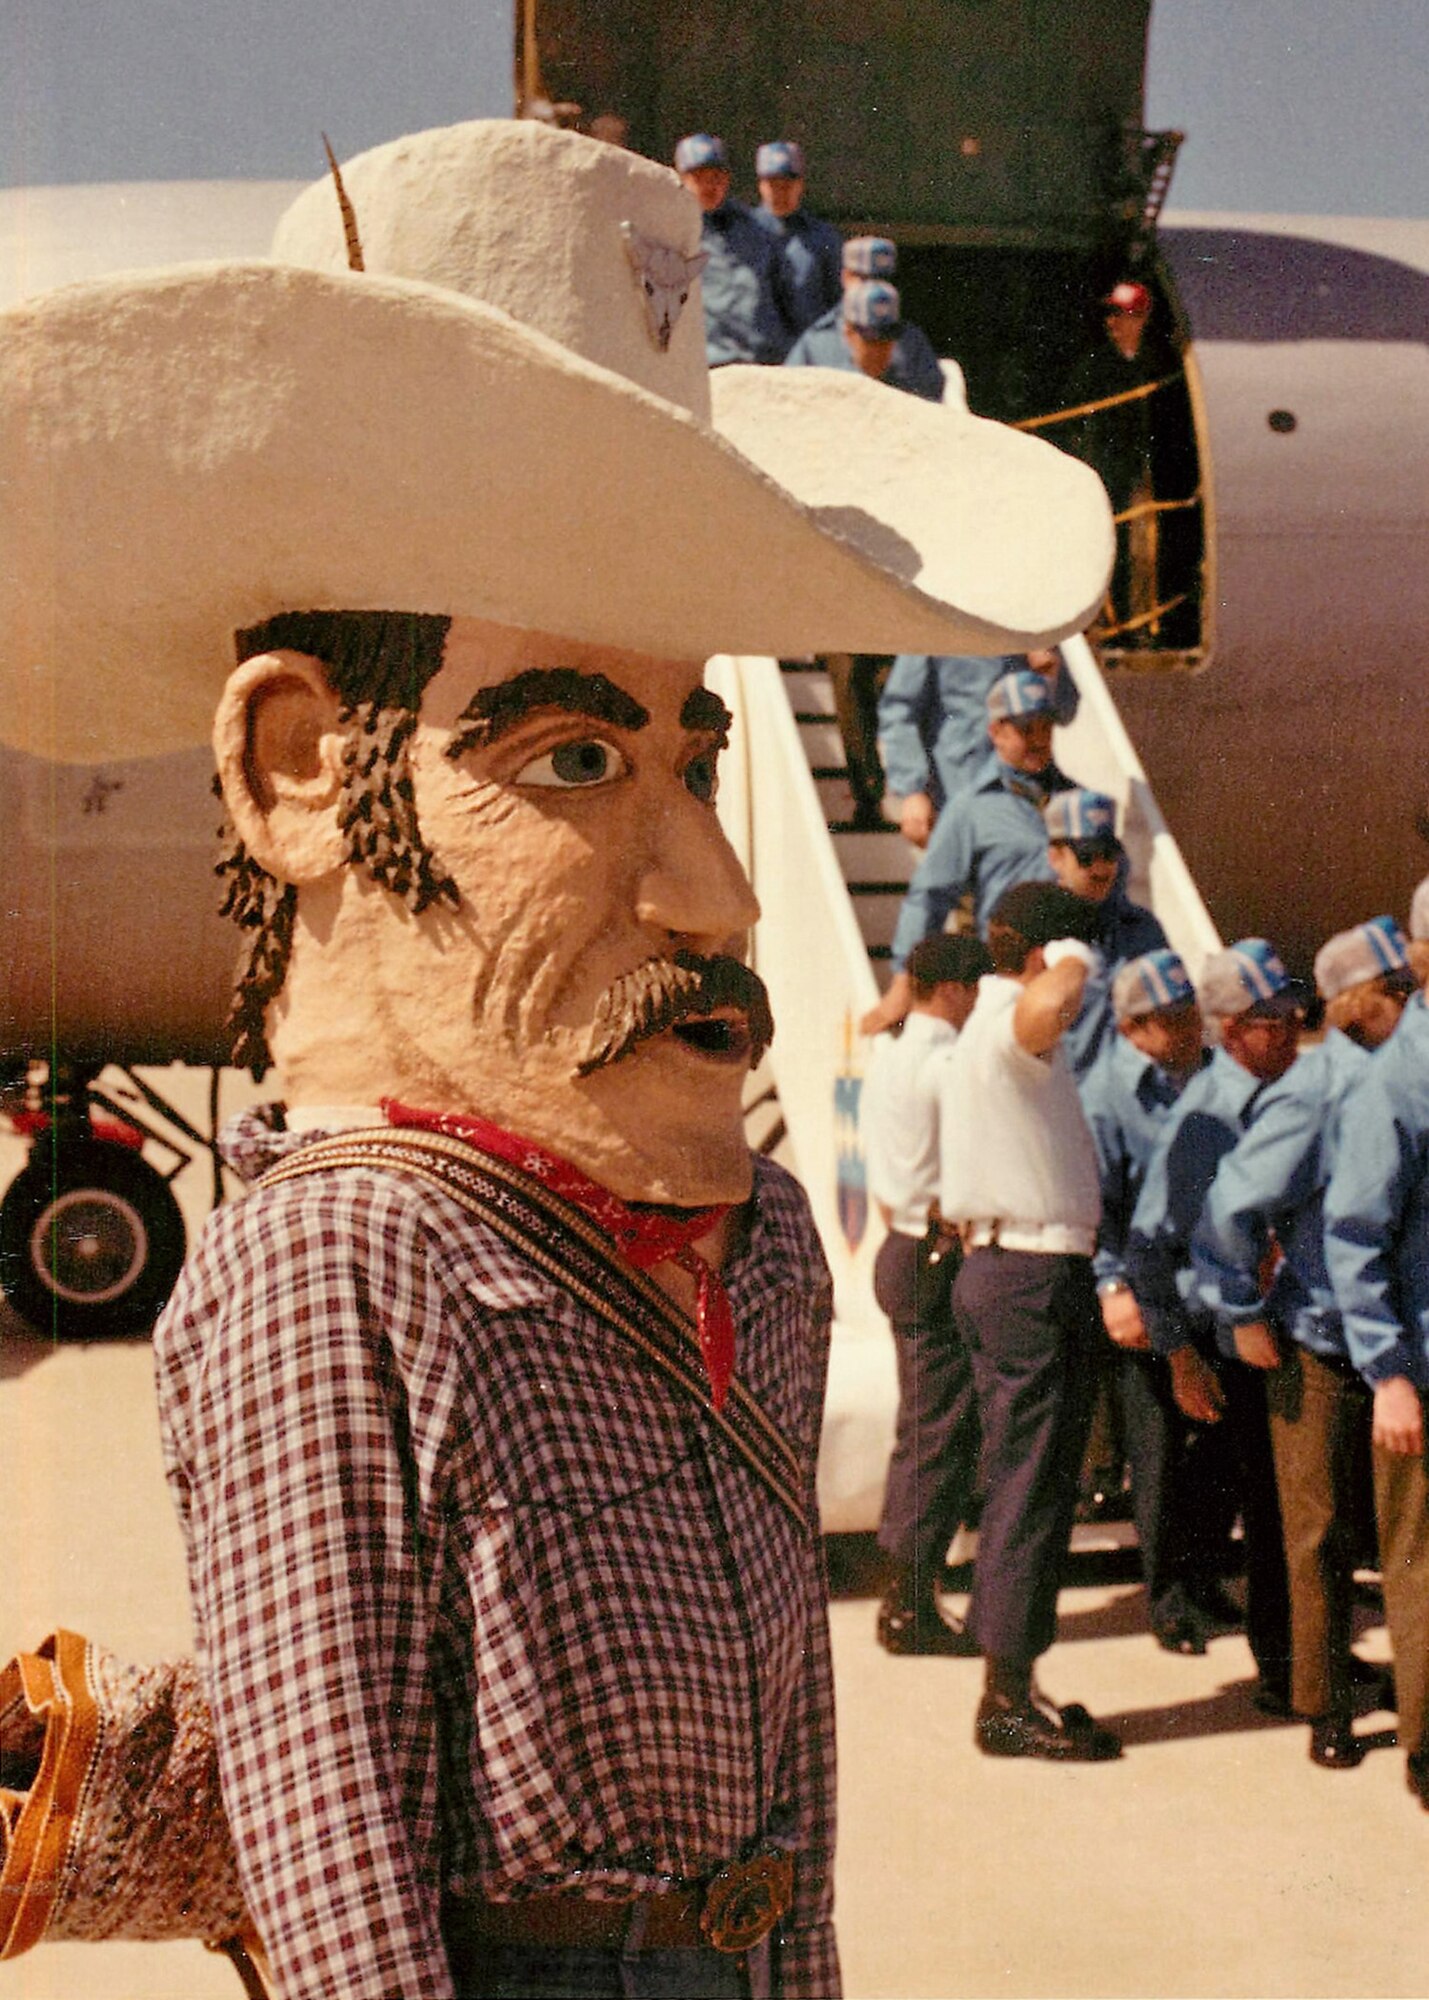 A caricature of a cowboy watches as the 341st Strategic Missile Wing’s Missile Combat Competition team disembarks from a KC-135 Stratotanker. A 1981 group photo of team mascots at Vandenberg Air Force Base, Calif., suggests this was the 341st SMW’s mascot in the early 1980s. (Photo courtesy of 341st MW Historian Office)